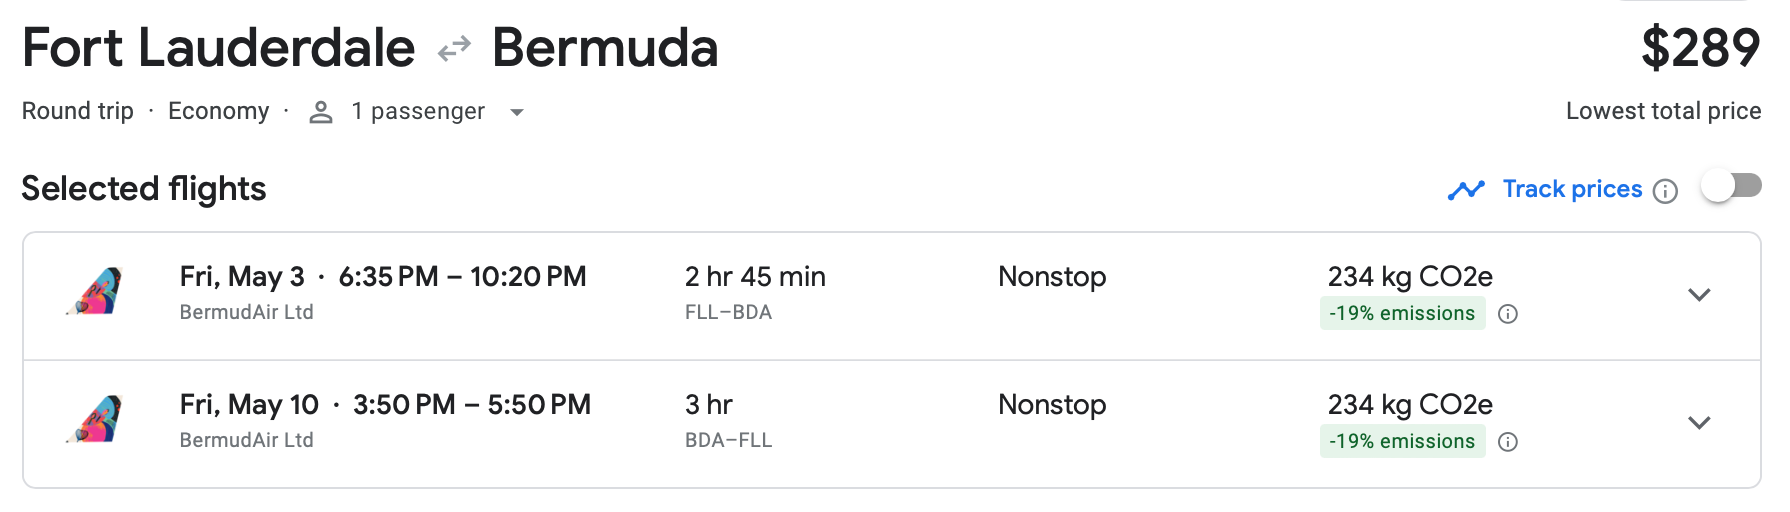 Non-stop from New York to Bermuda for only $292 roundtrip